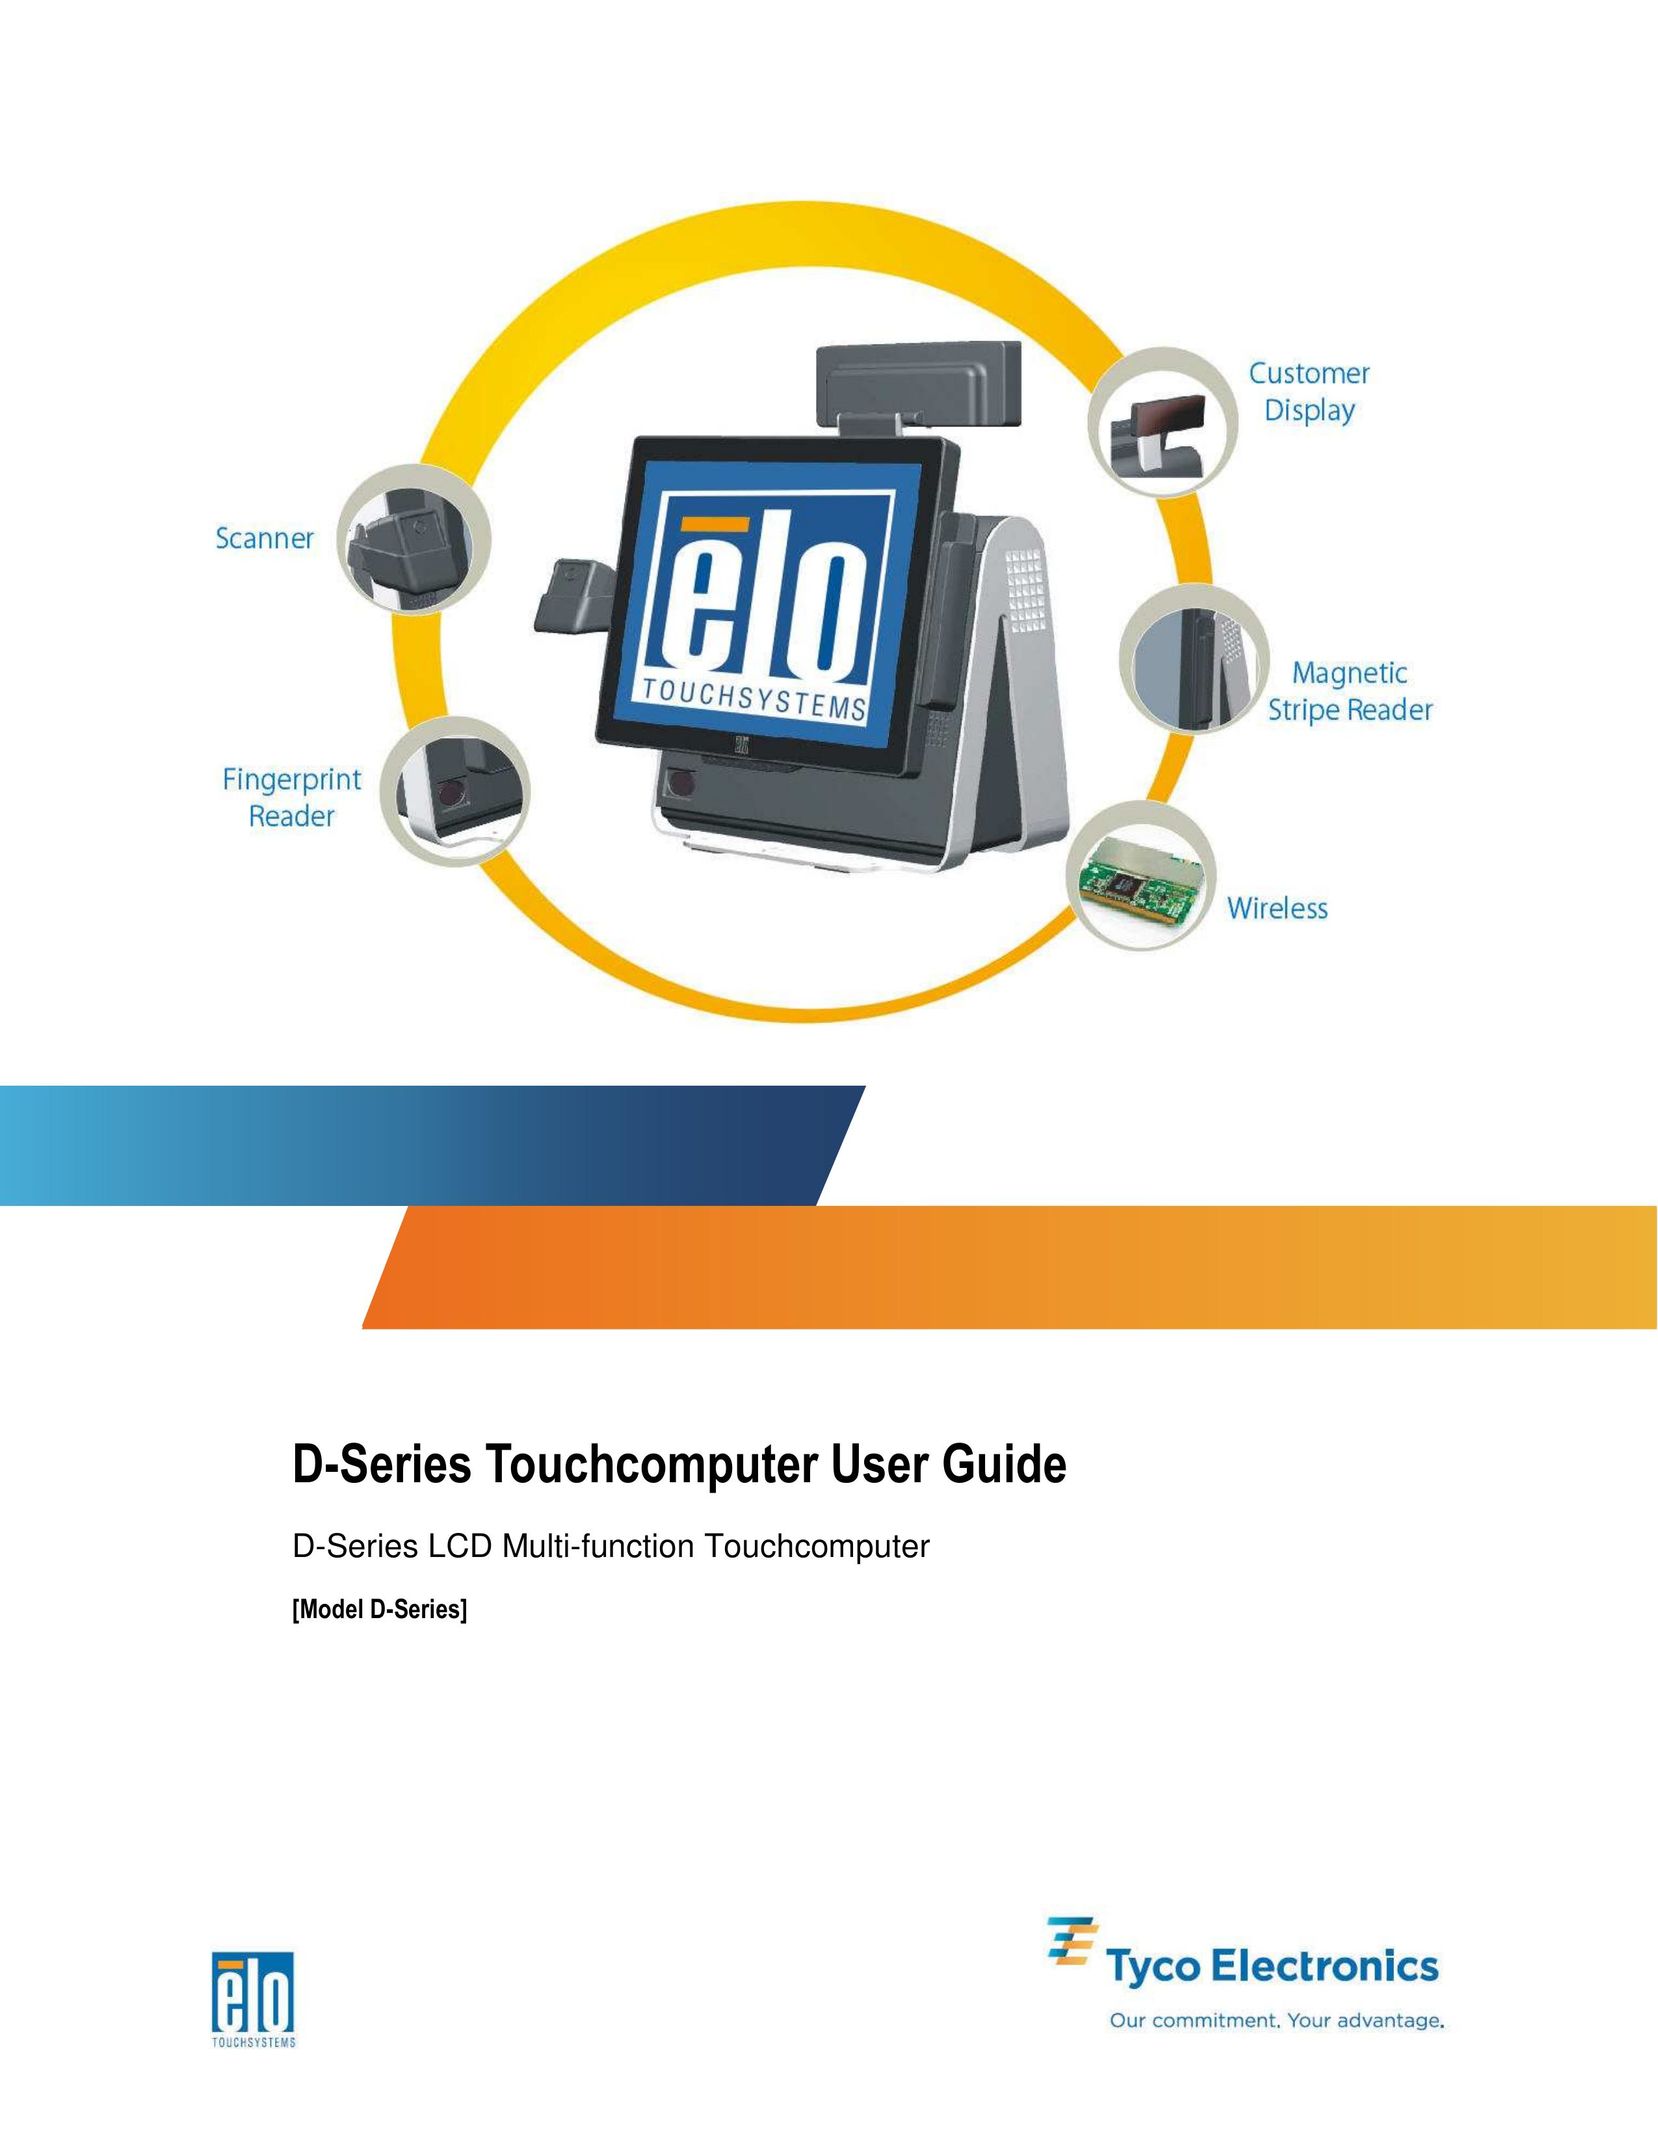 Elo TouchSystems D-Series Car Video System User Manual